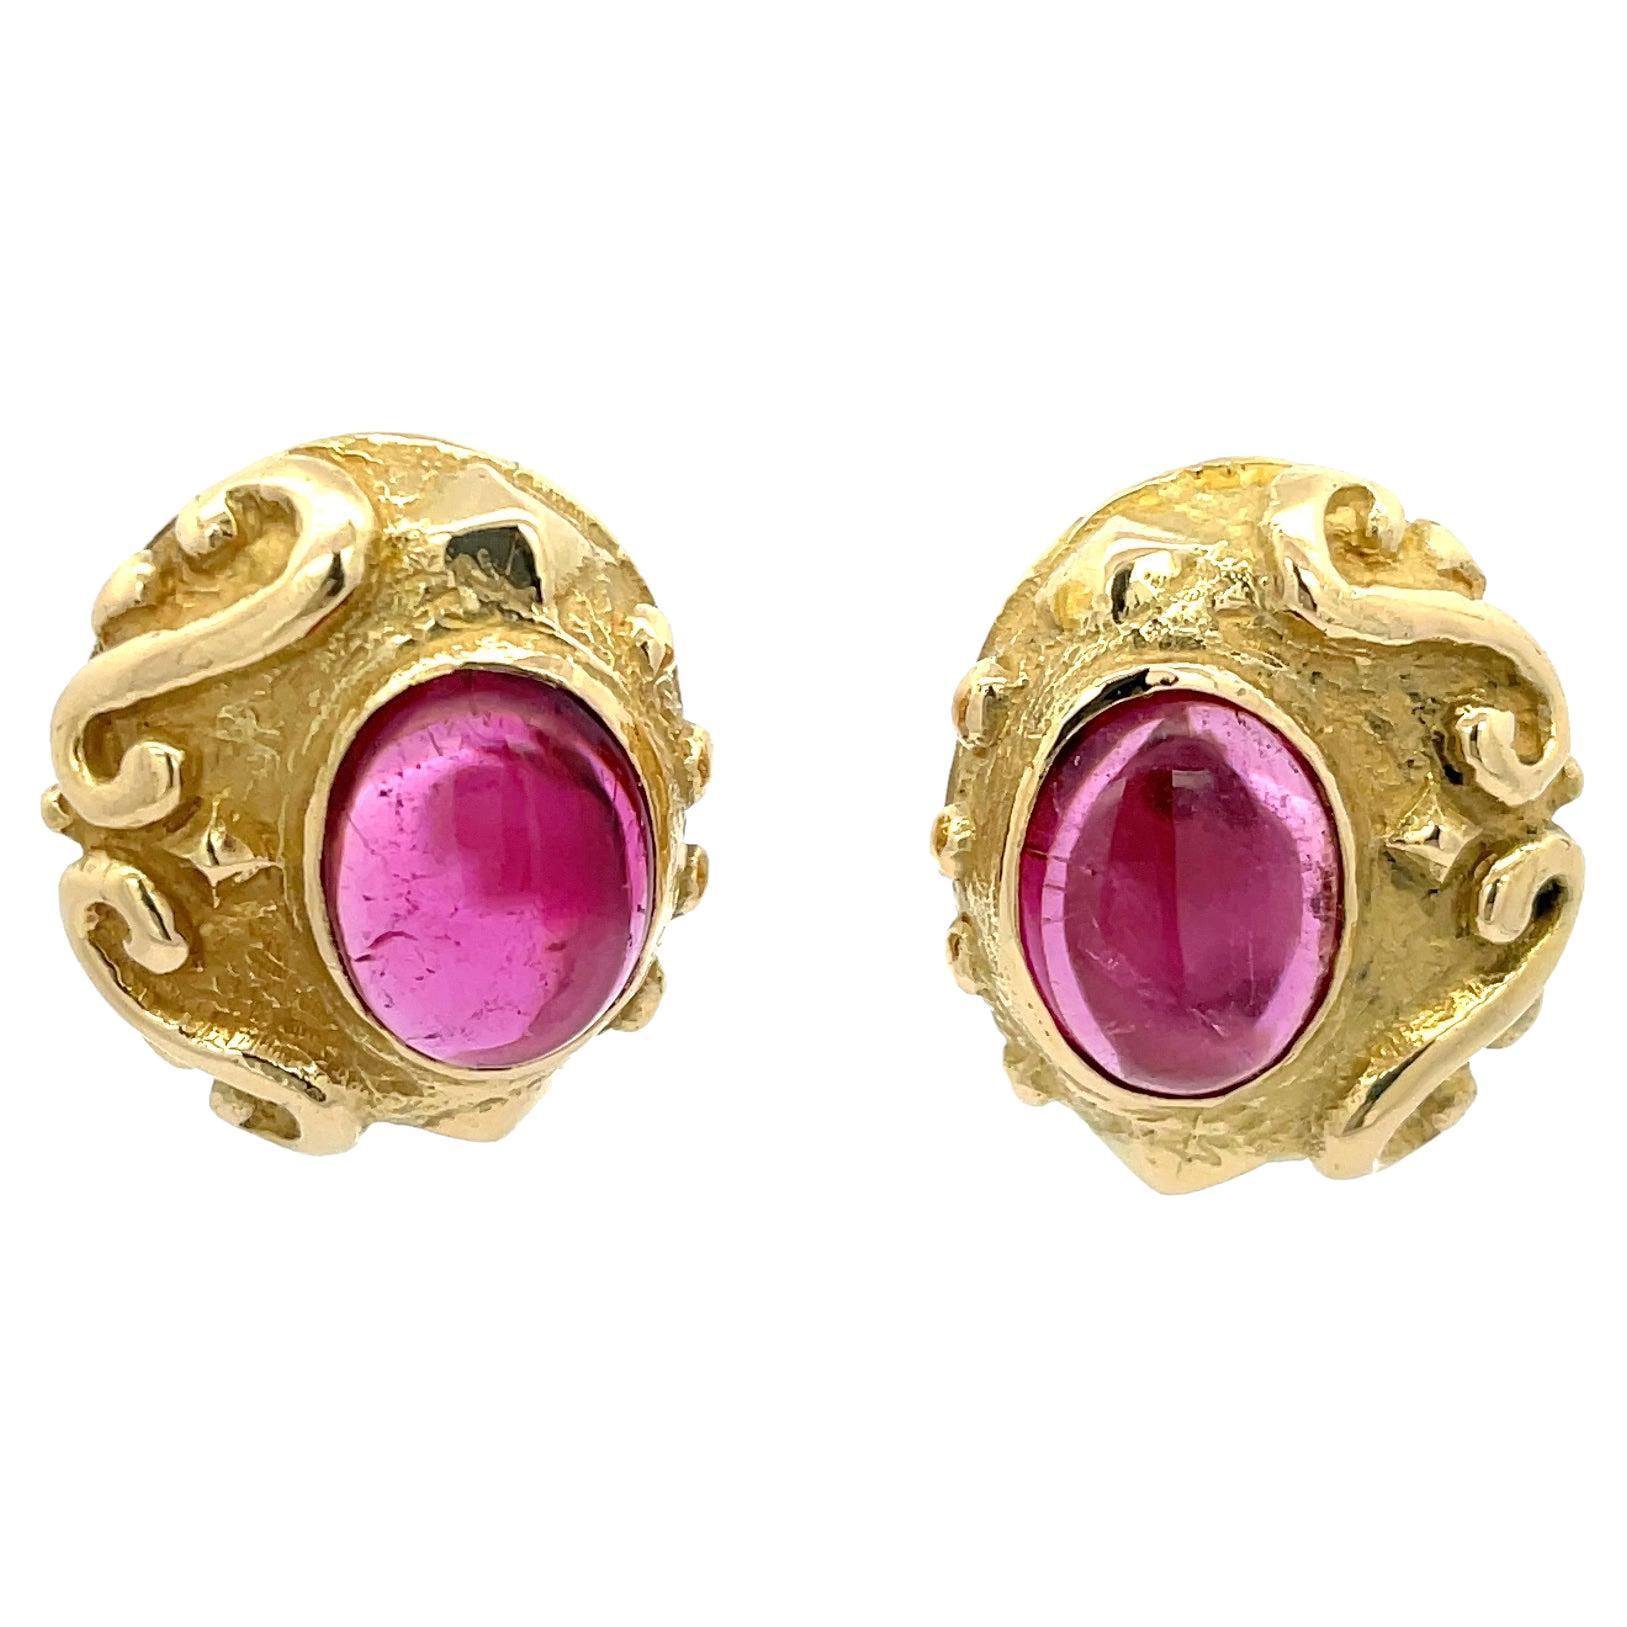 Katy Briscoe Cabochon Rubellite Earrings 18K Yellow Gold For Sale